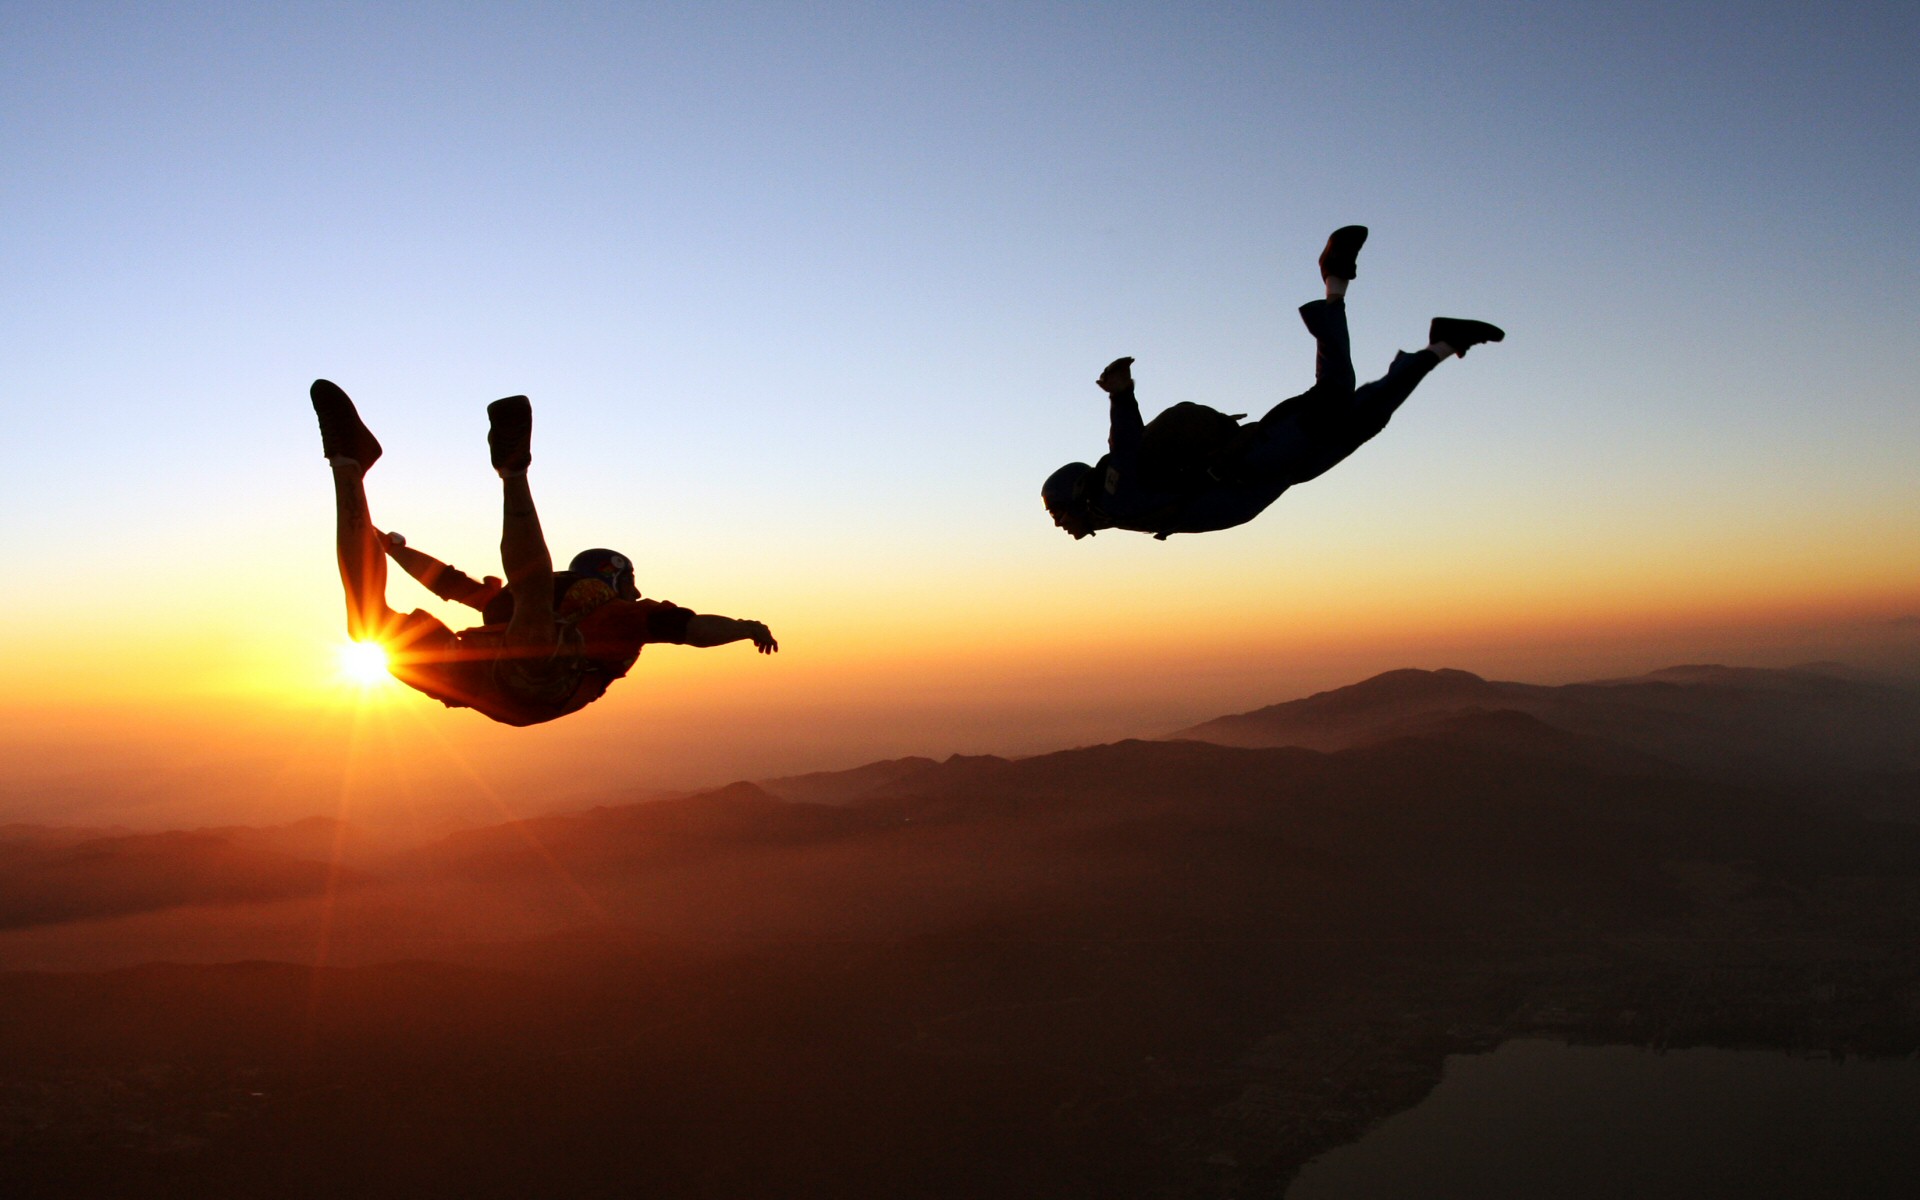 two persons skydiving image